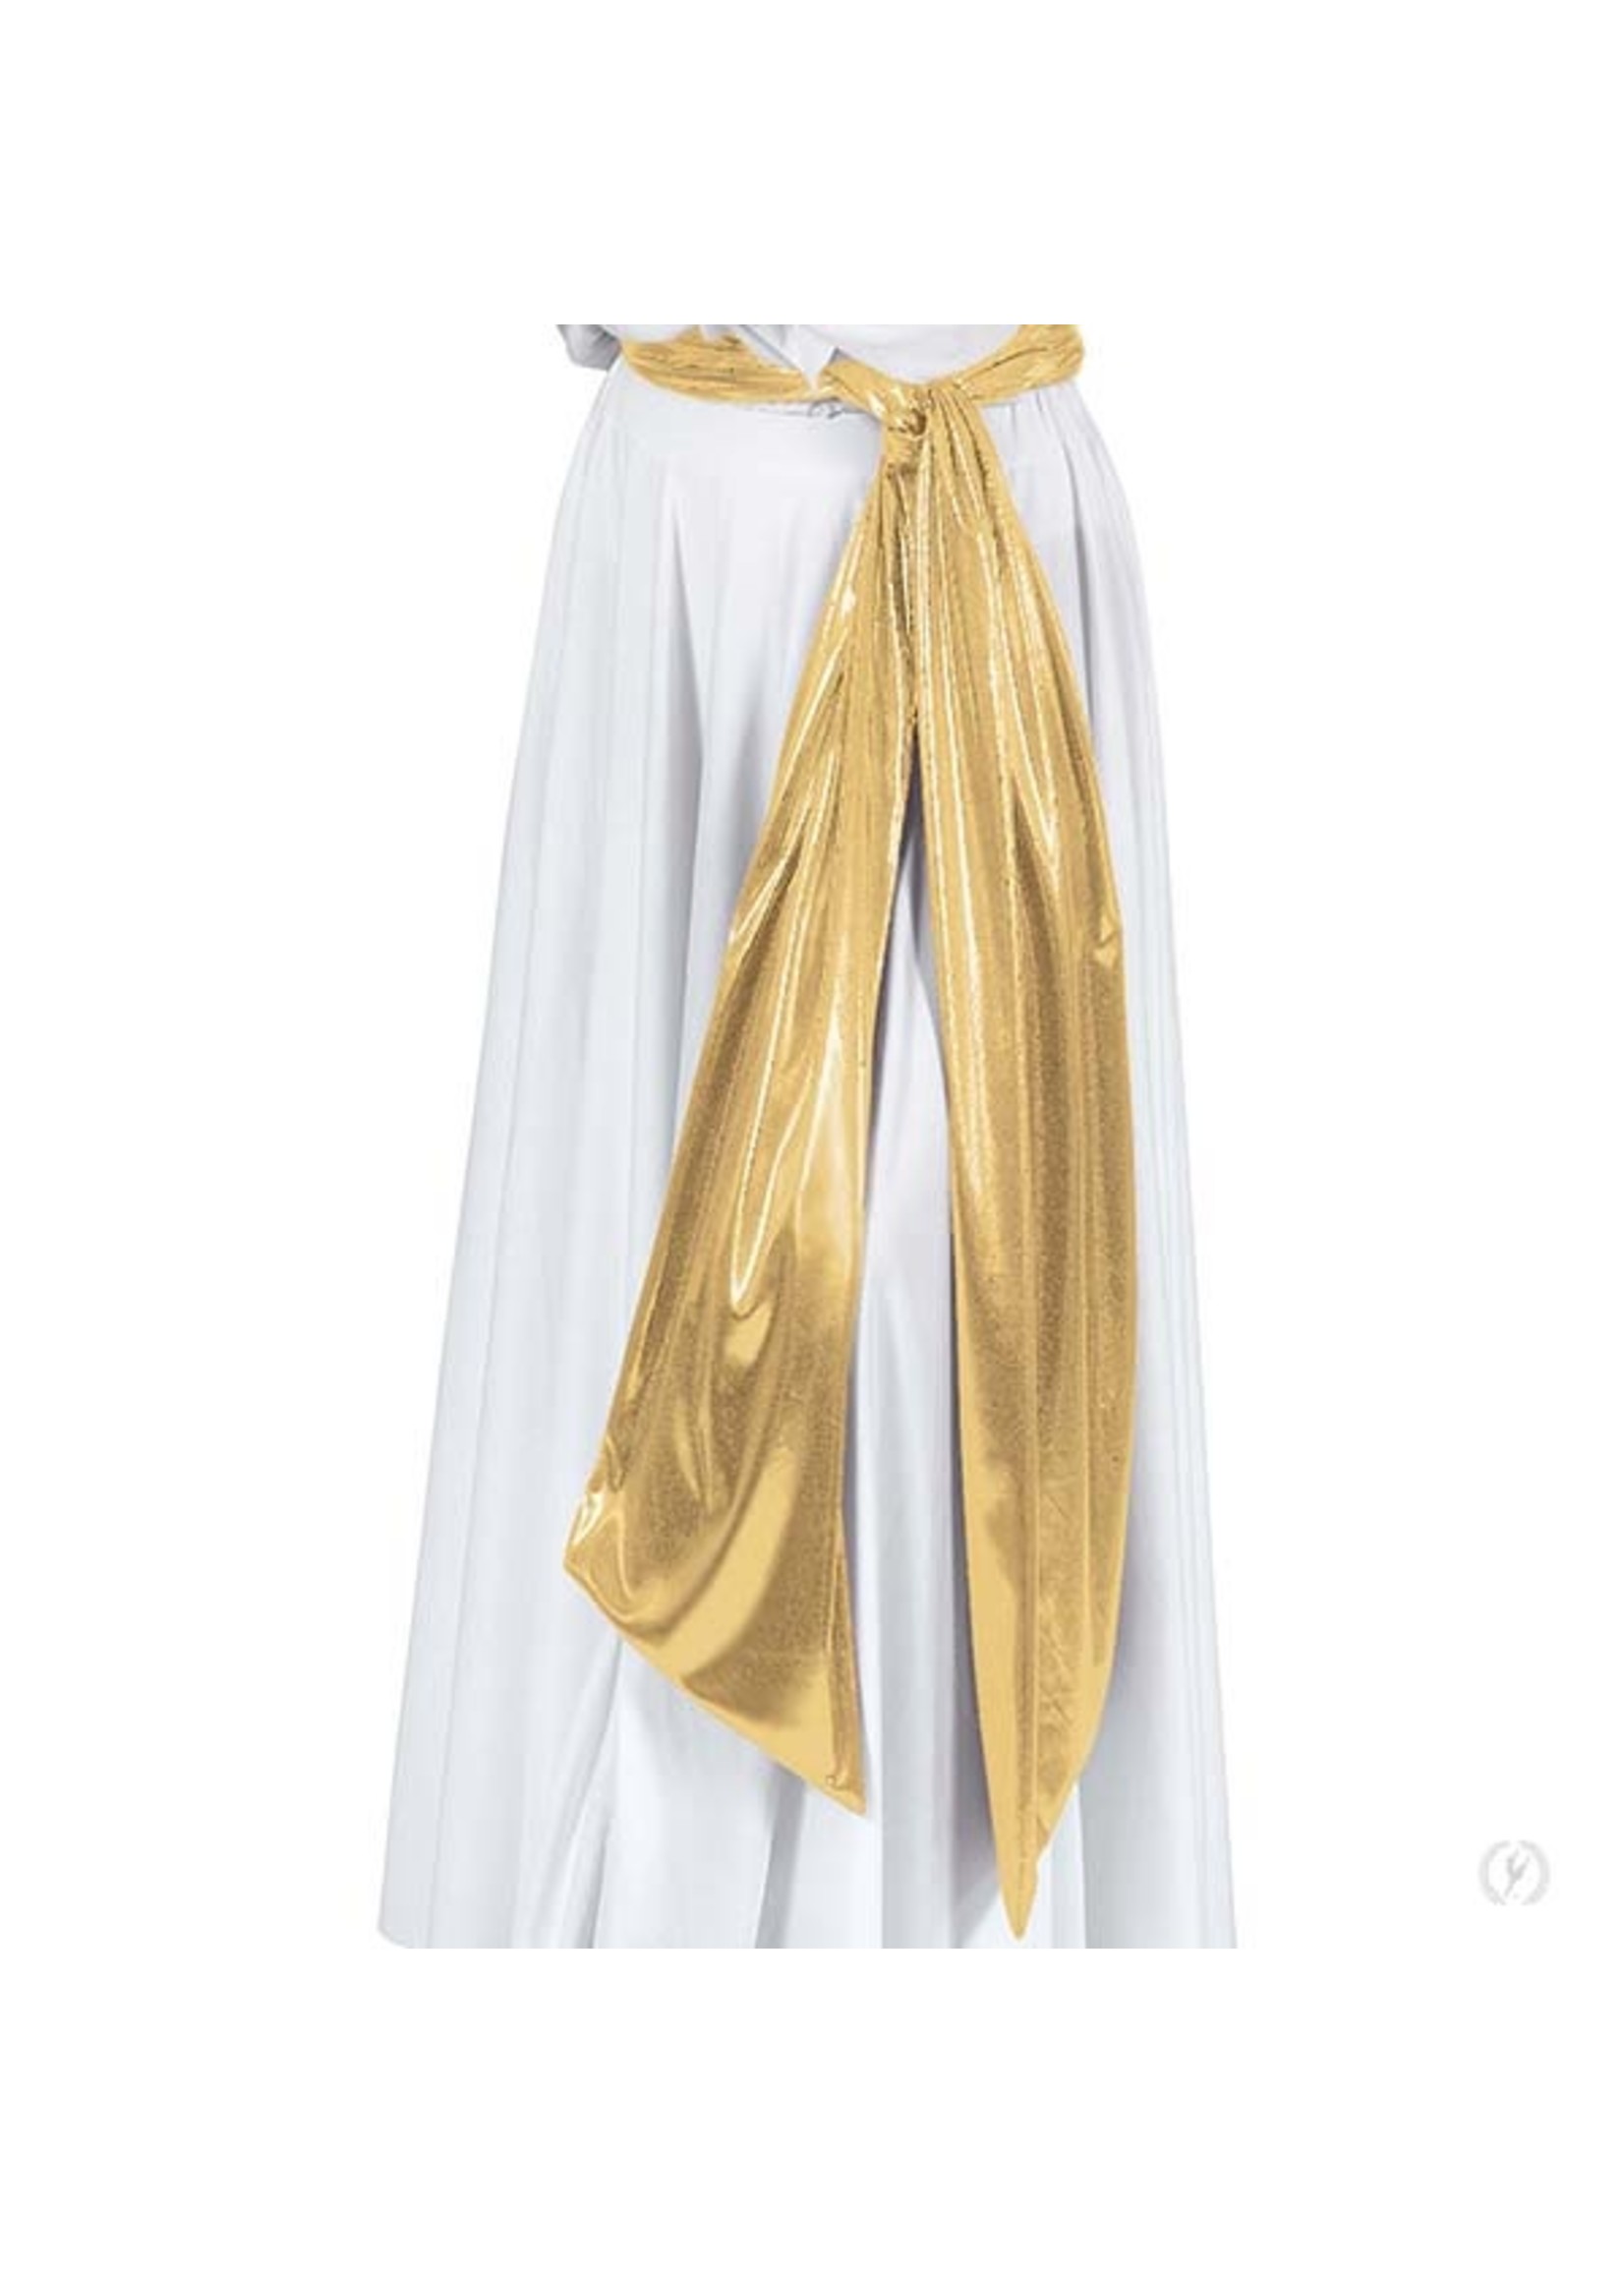 Extra Long Metallic Praise Dance Sash - Truly Anointed